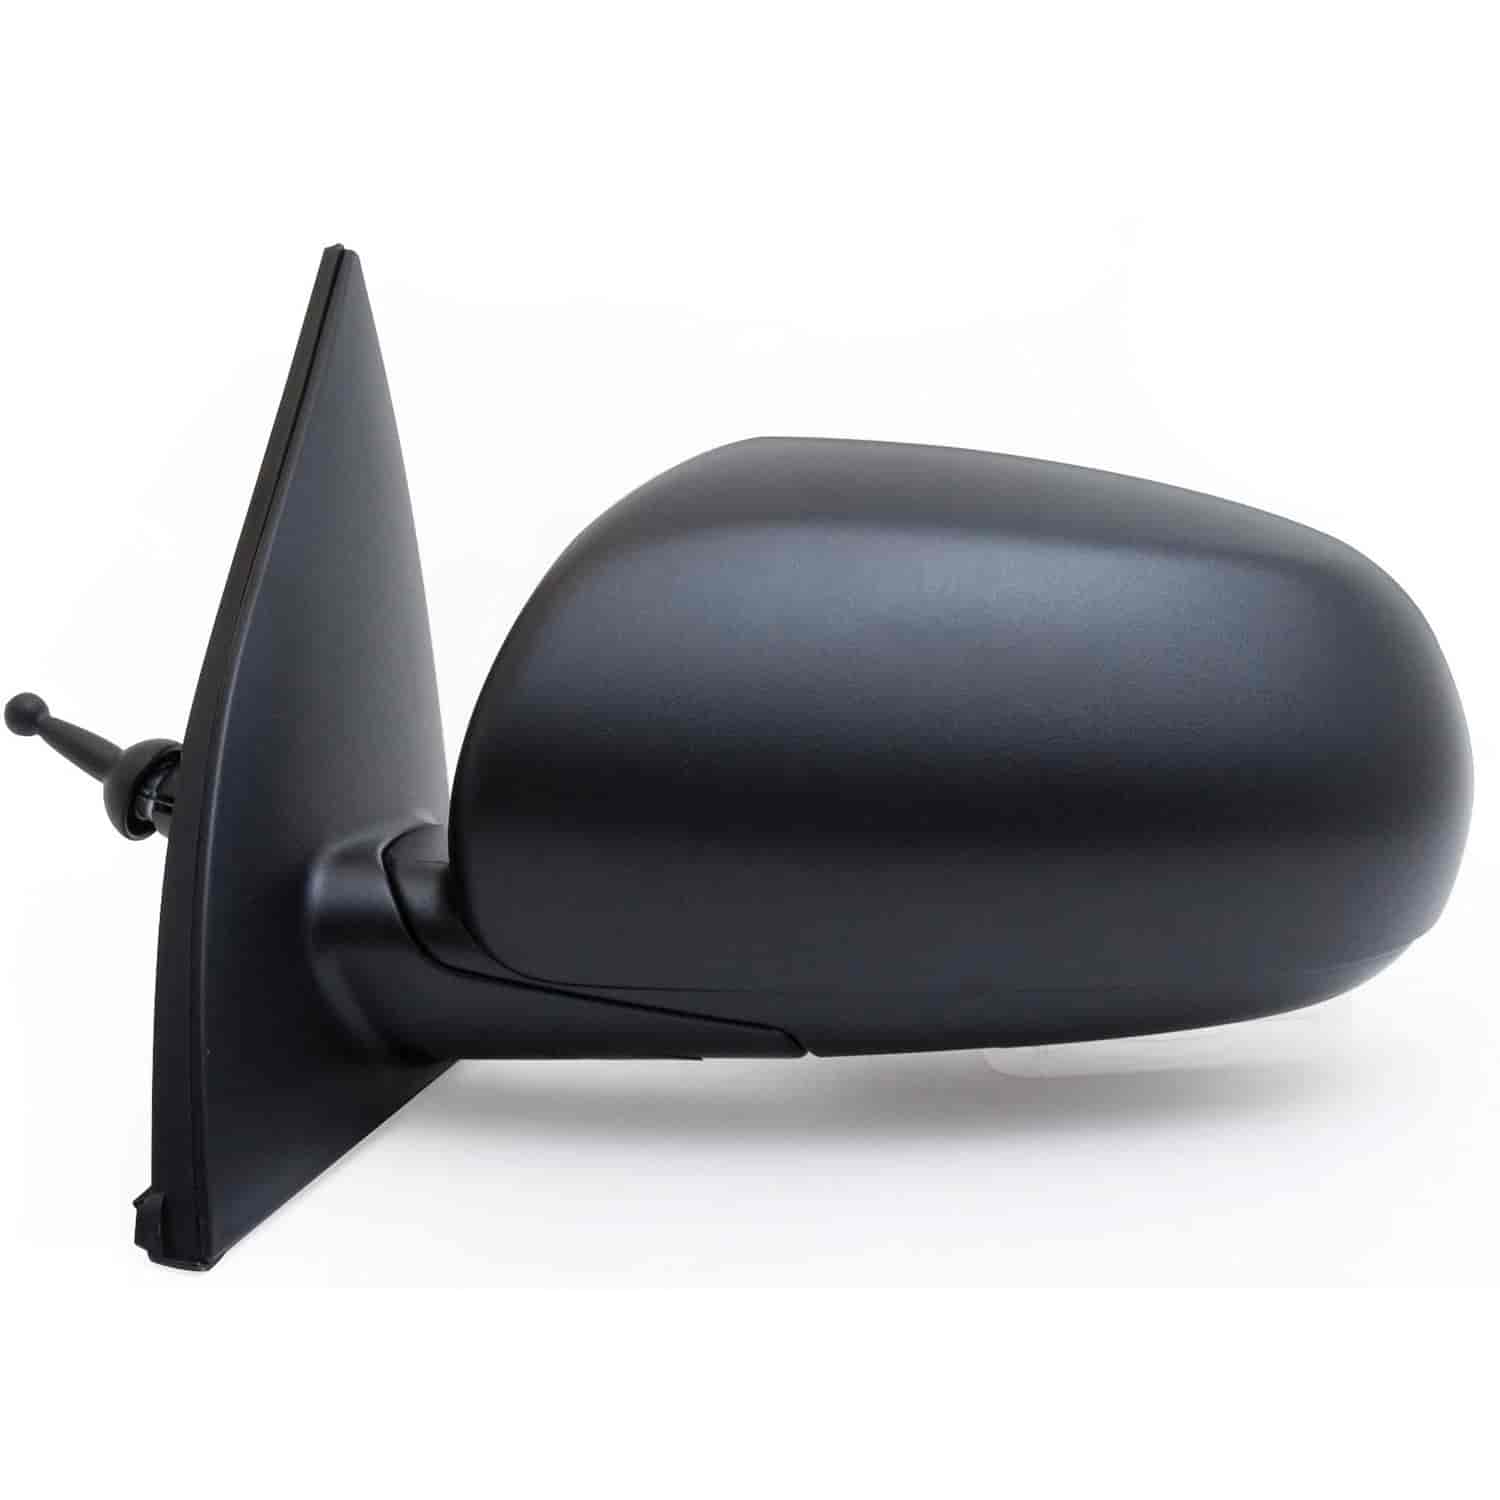 OEM Style Replacement mirror for 10-11 Hyundai Accent Sedan/ Hatchback driver side mirror tested to